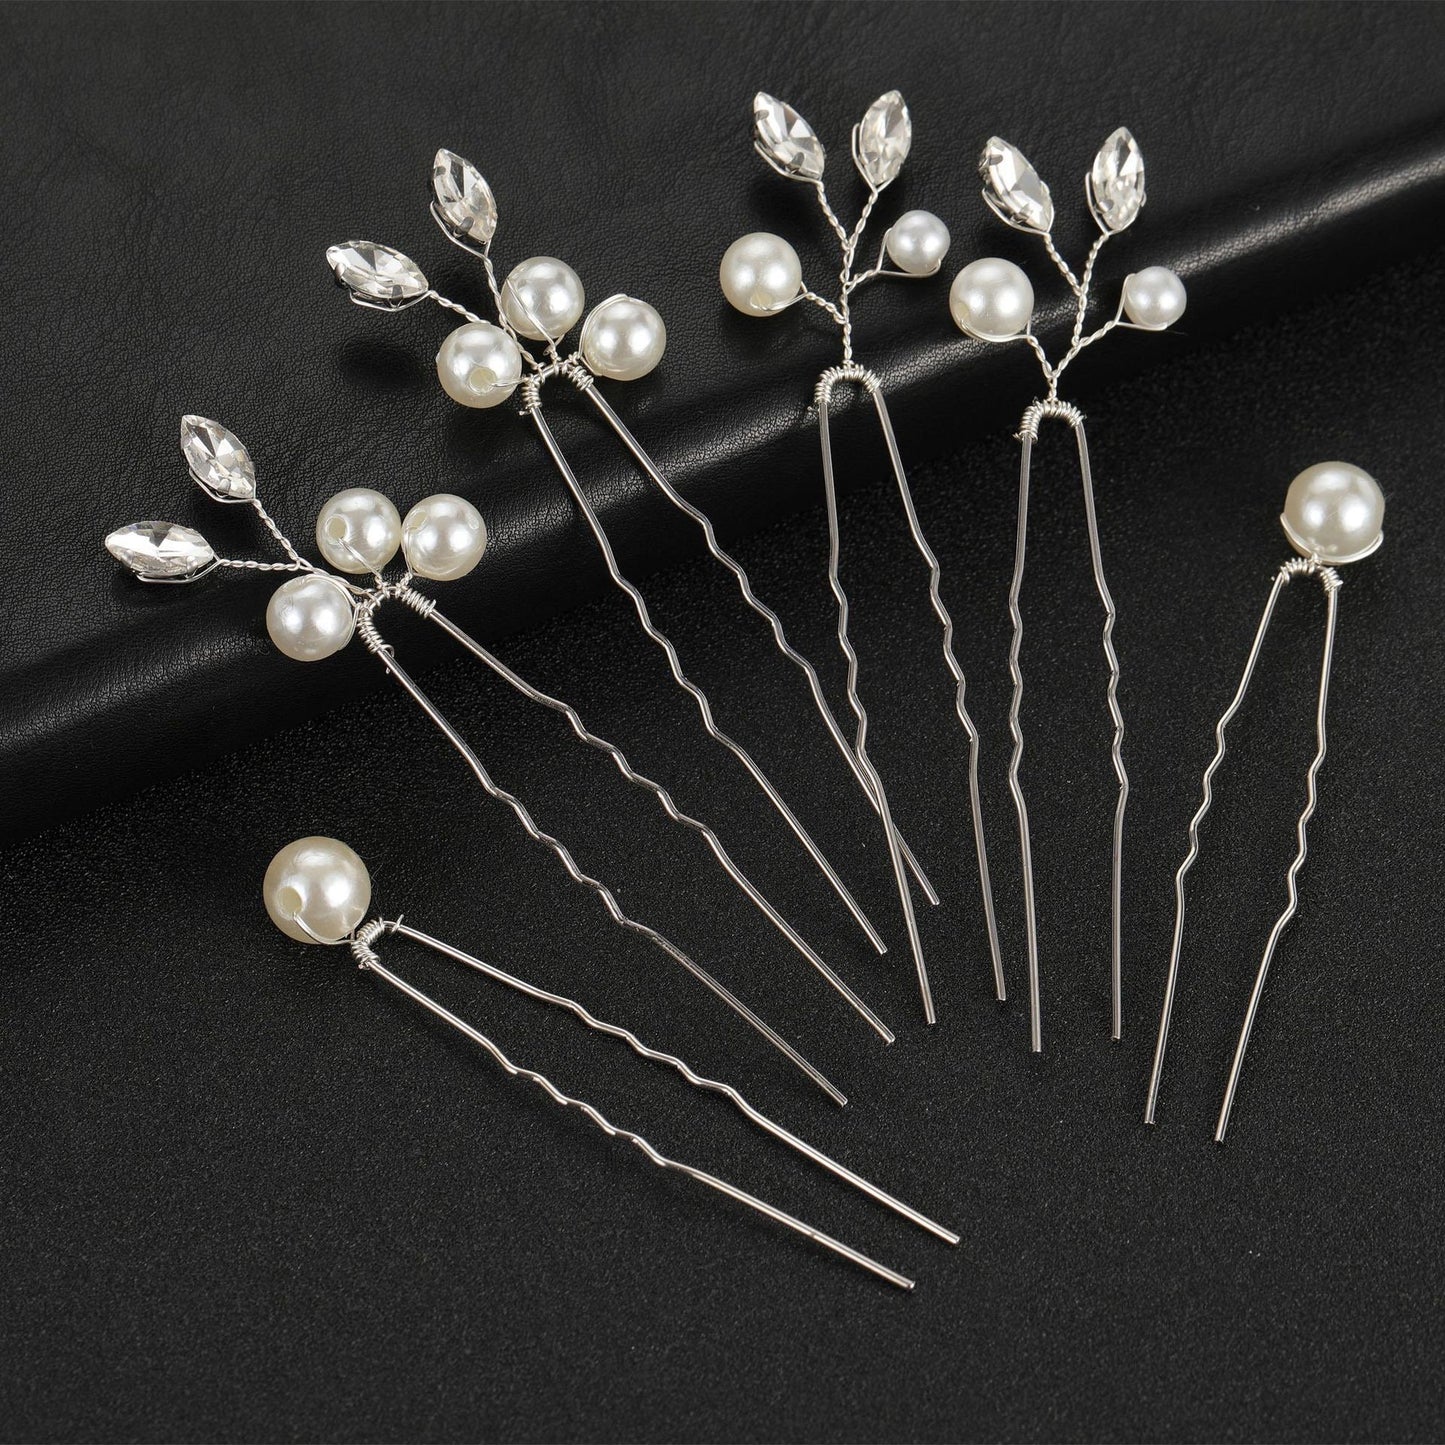 Set of 6 Bridal Hairpins, Pearl and Crystal Hair Pin, Wedding Hair Clip, Gold/Silver Hair Accessories for Brides, Wedding Pearl Hairpin